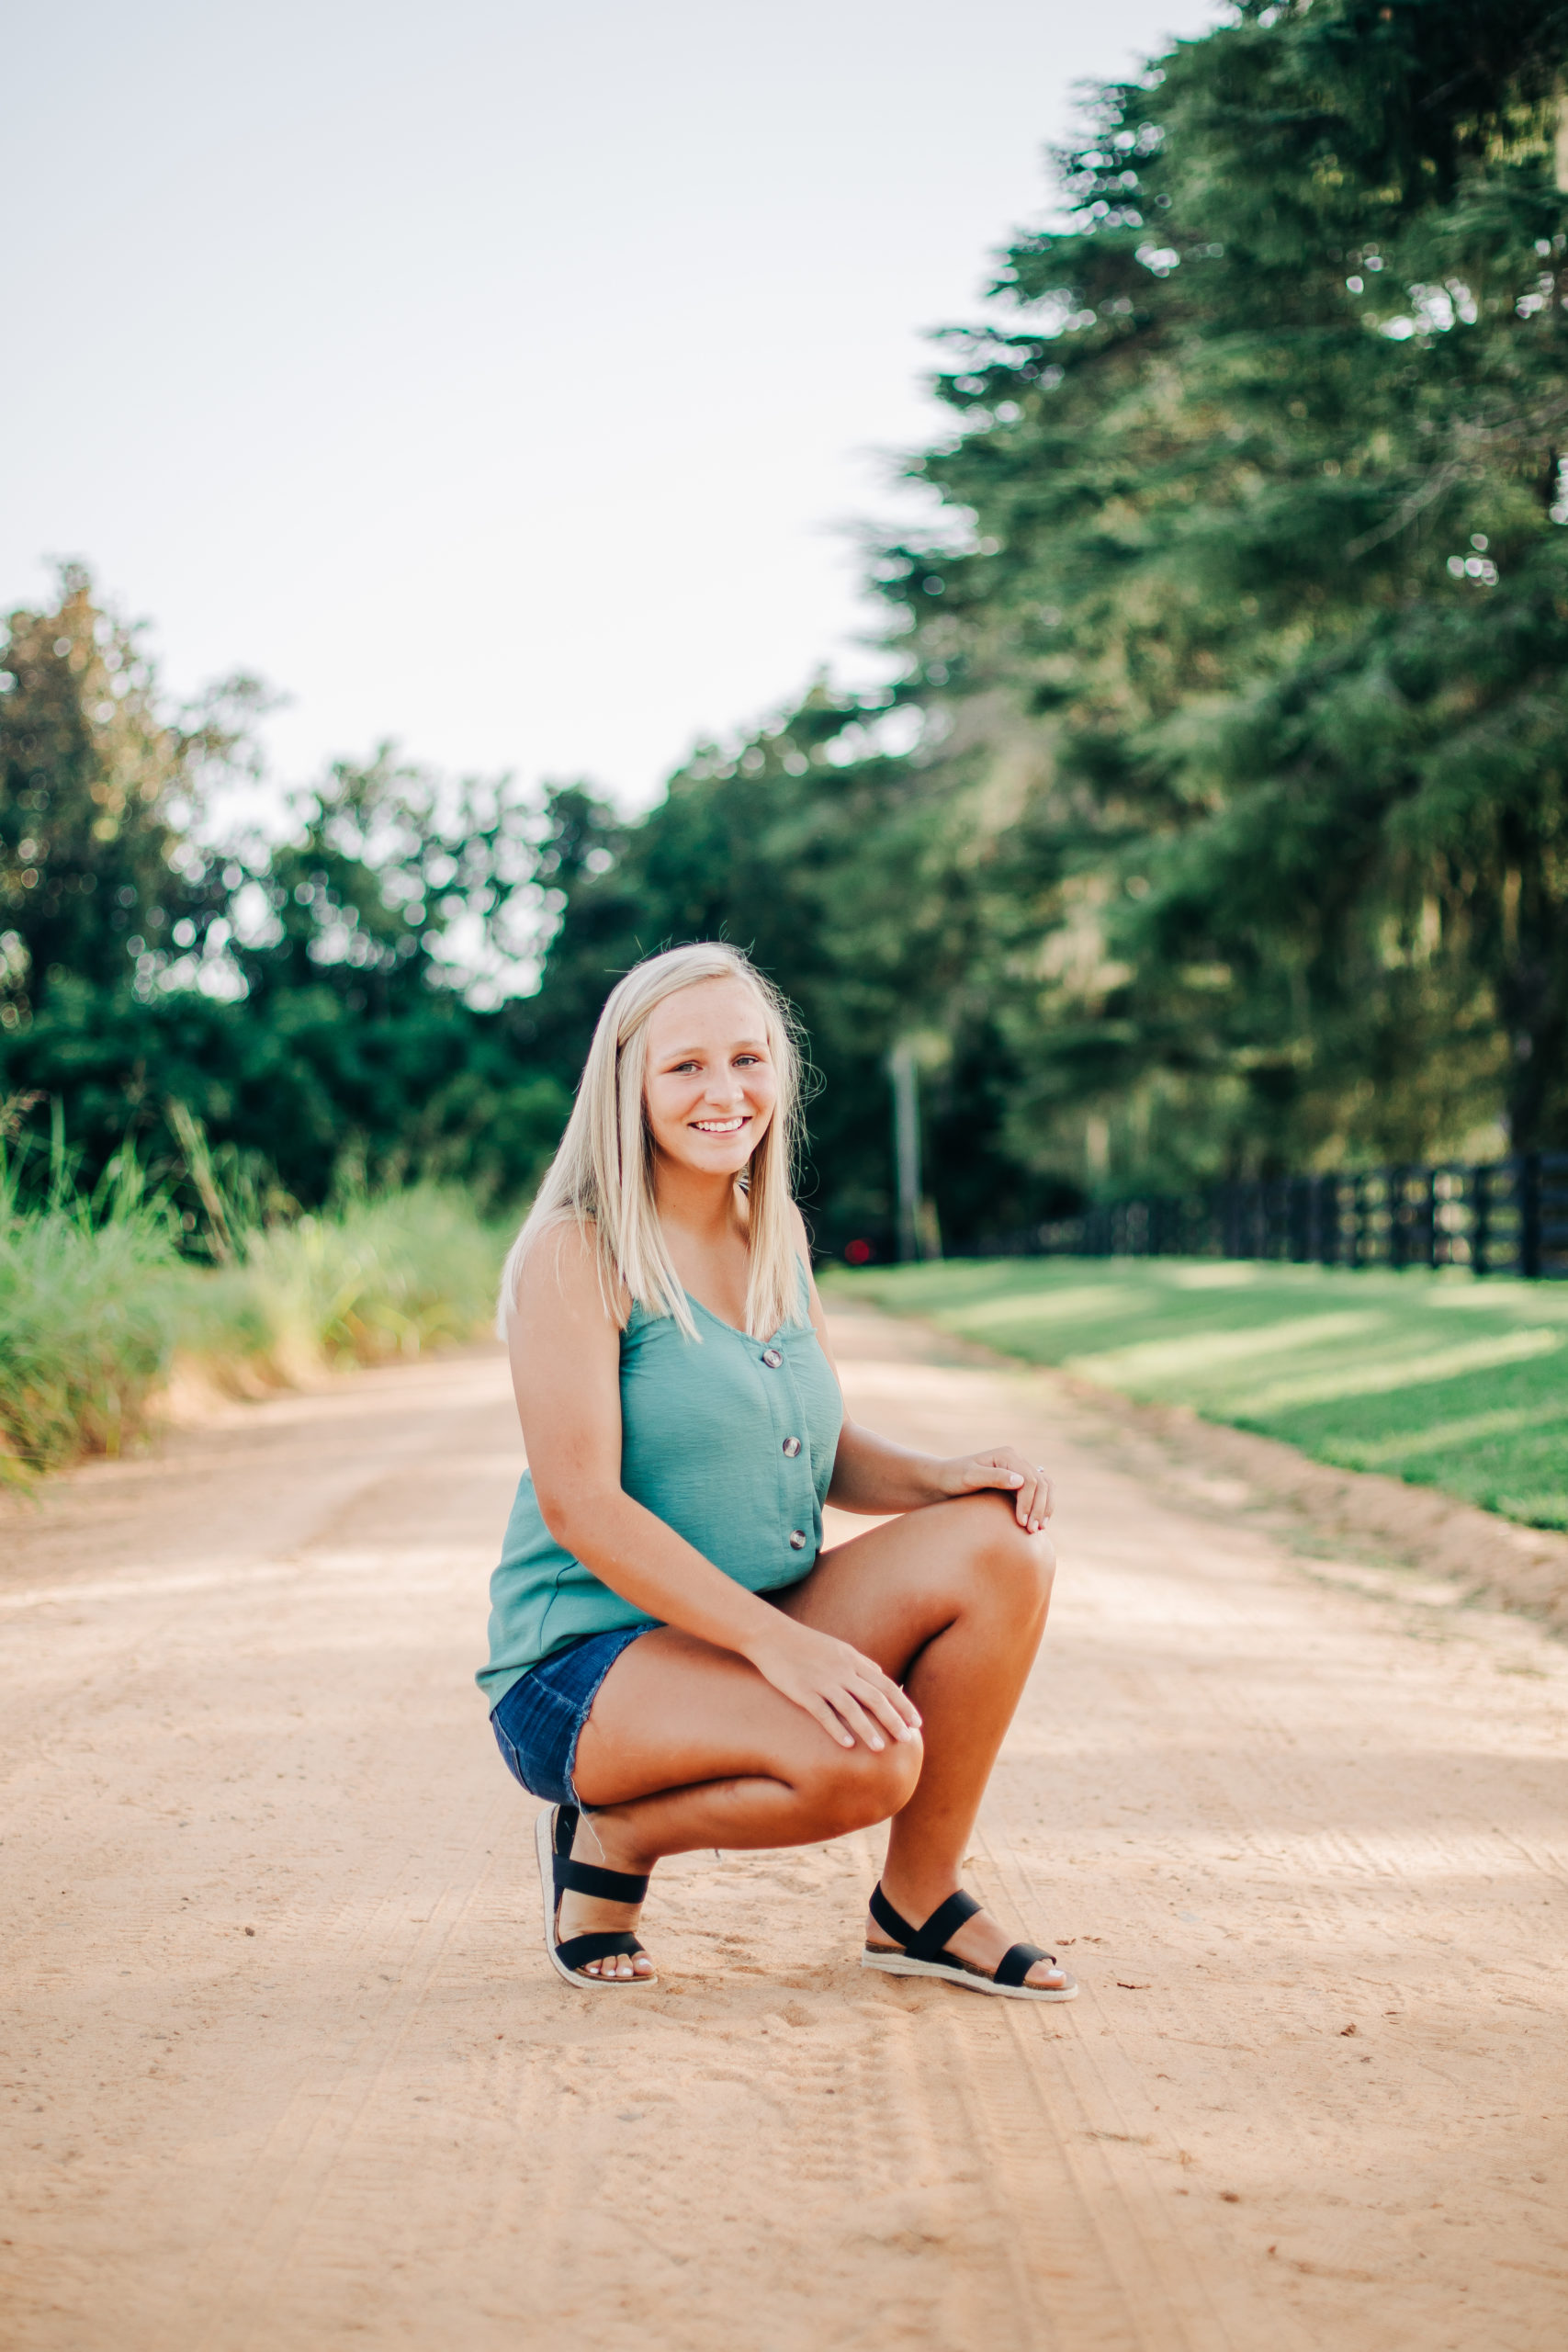 senior photos with girl crouching on a dirt path in the country for outdoor photoshoot 